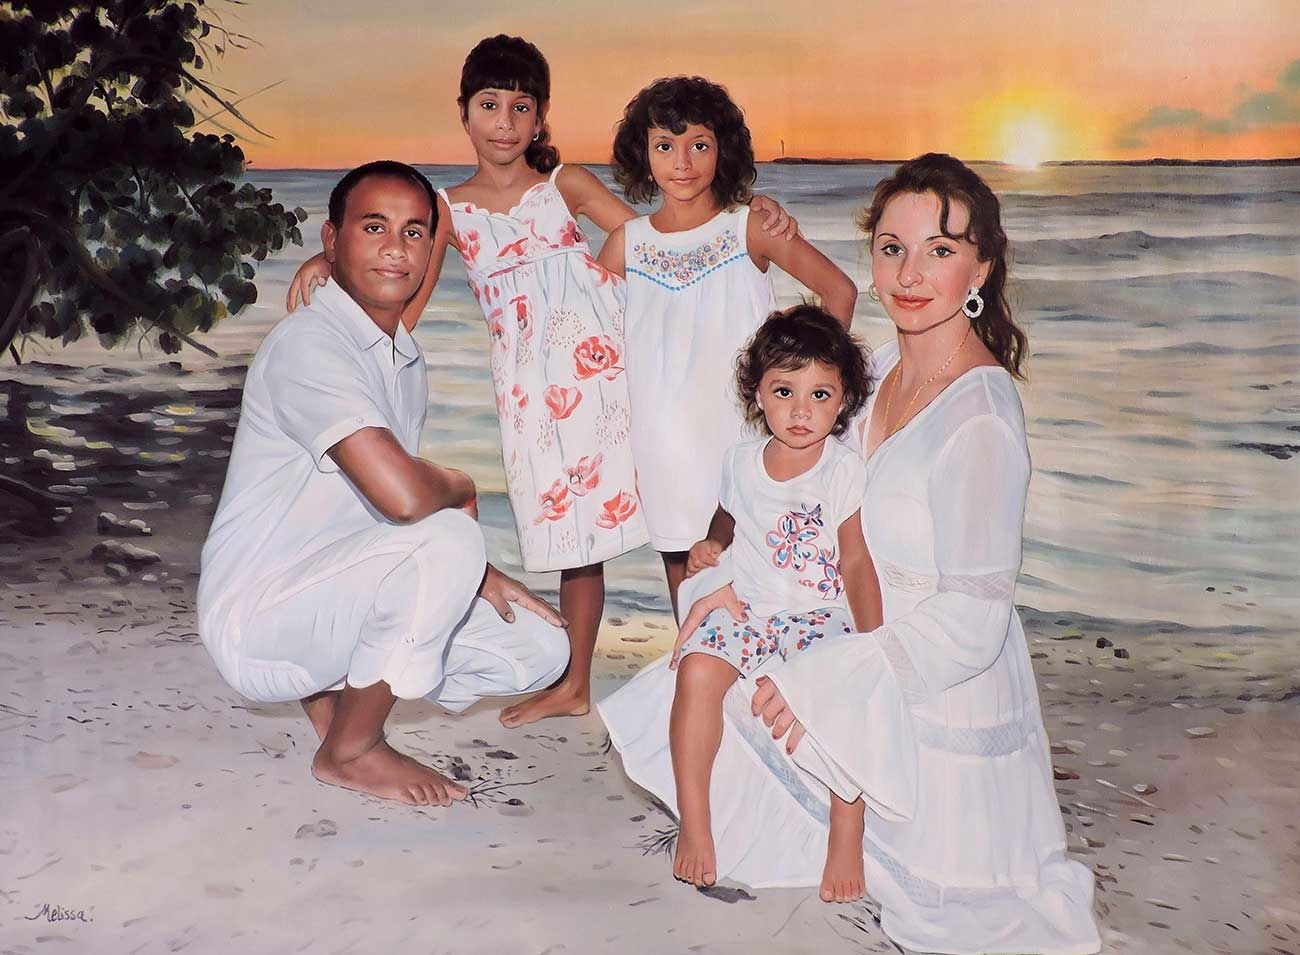 A portrait painted of a customer&#x27;s family at the beach